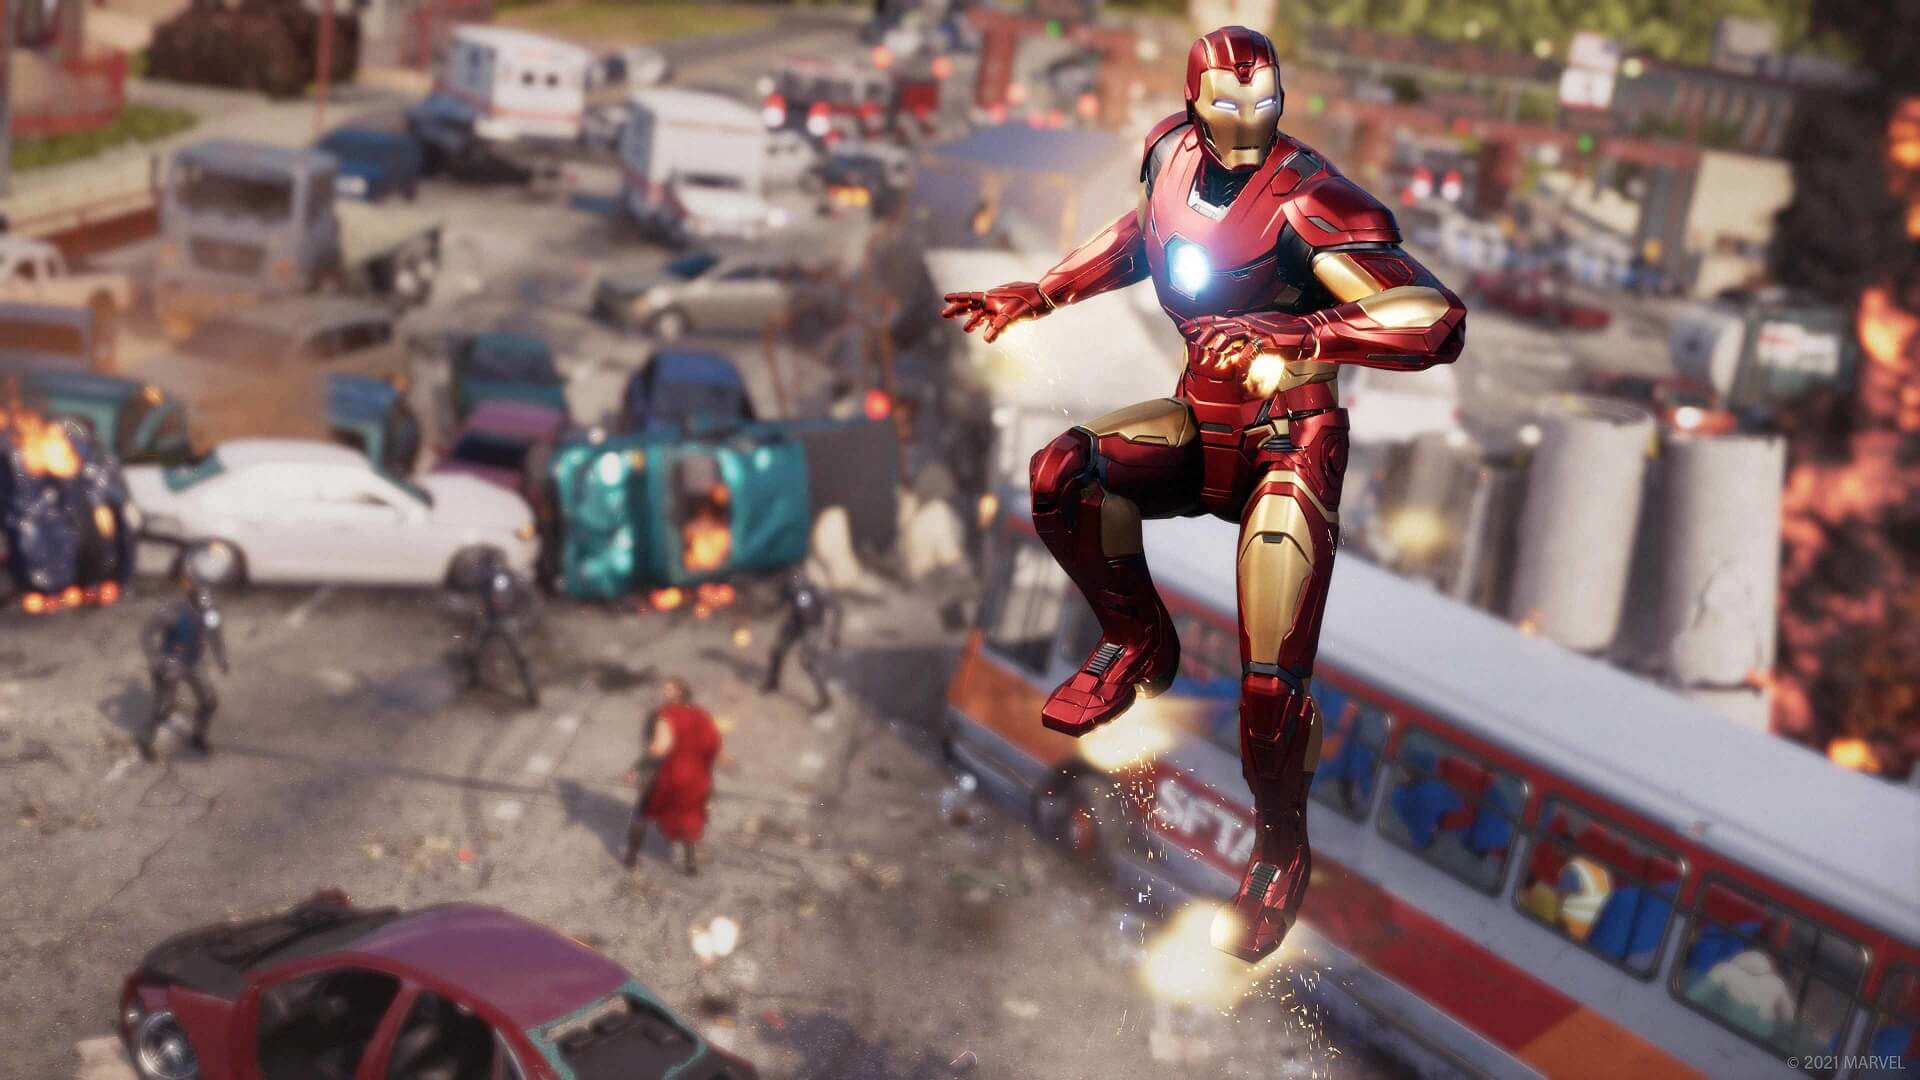 Marvel's Avengers, a game created by Crystal Dynamics